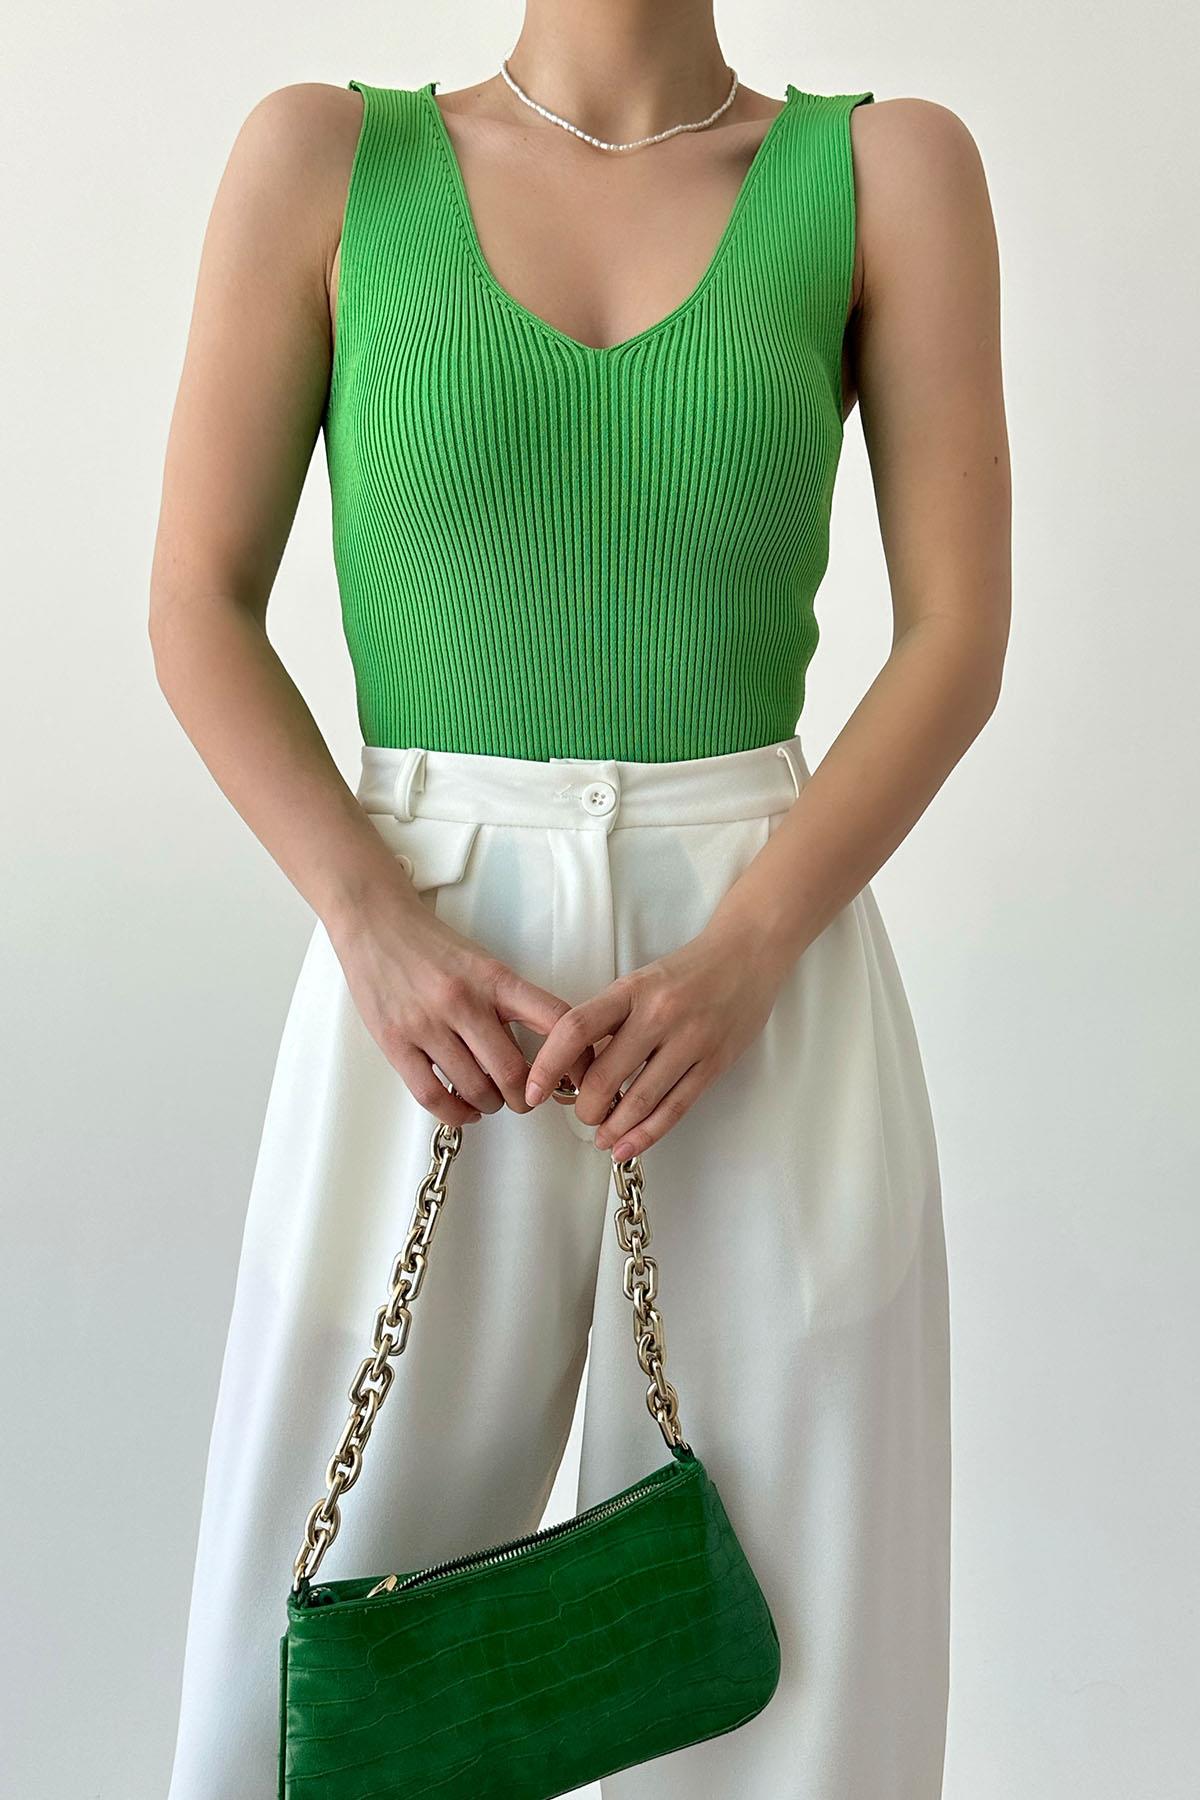 A wholesale clothing model wears V Neck Knitwear Singlet - Pistachio Green, Turkish wholesale Undershirt of Qustyle